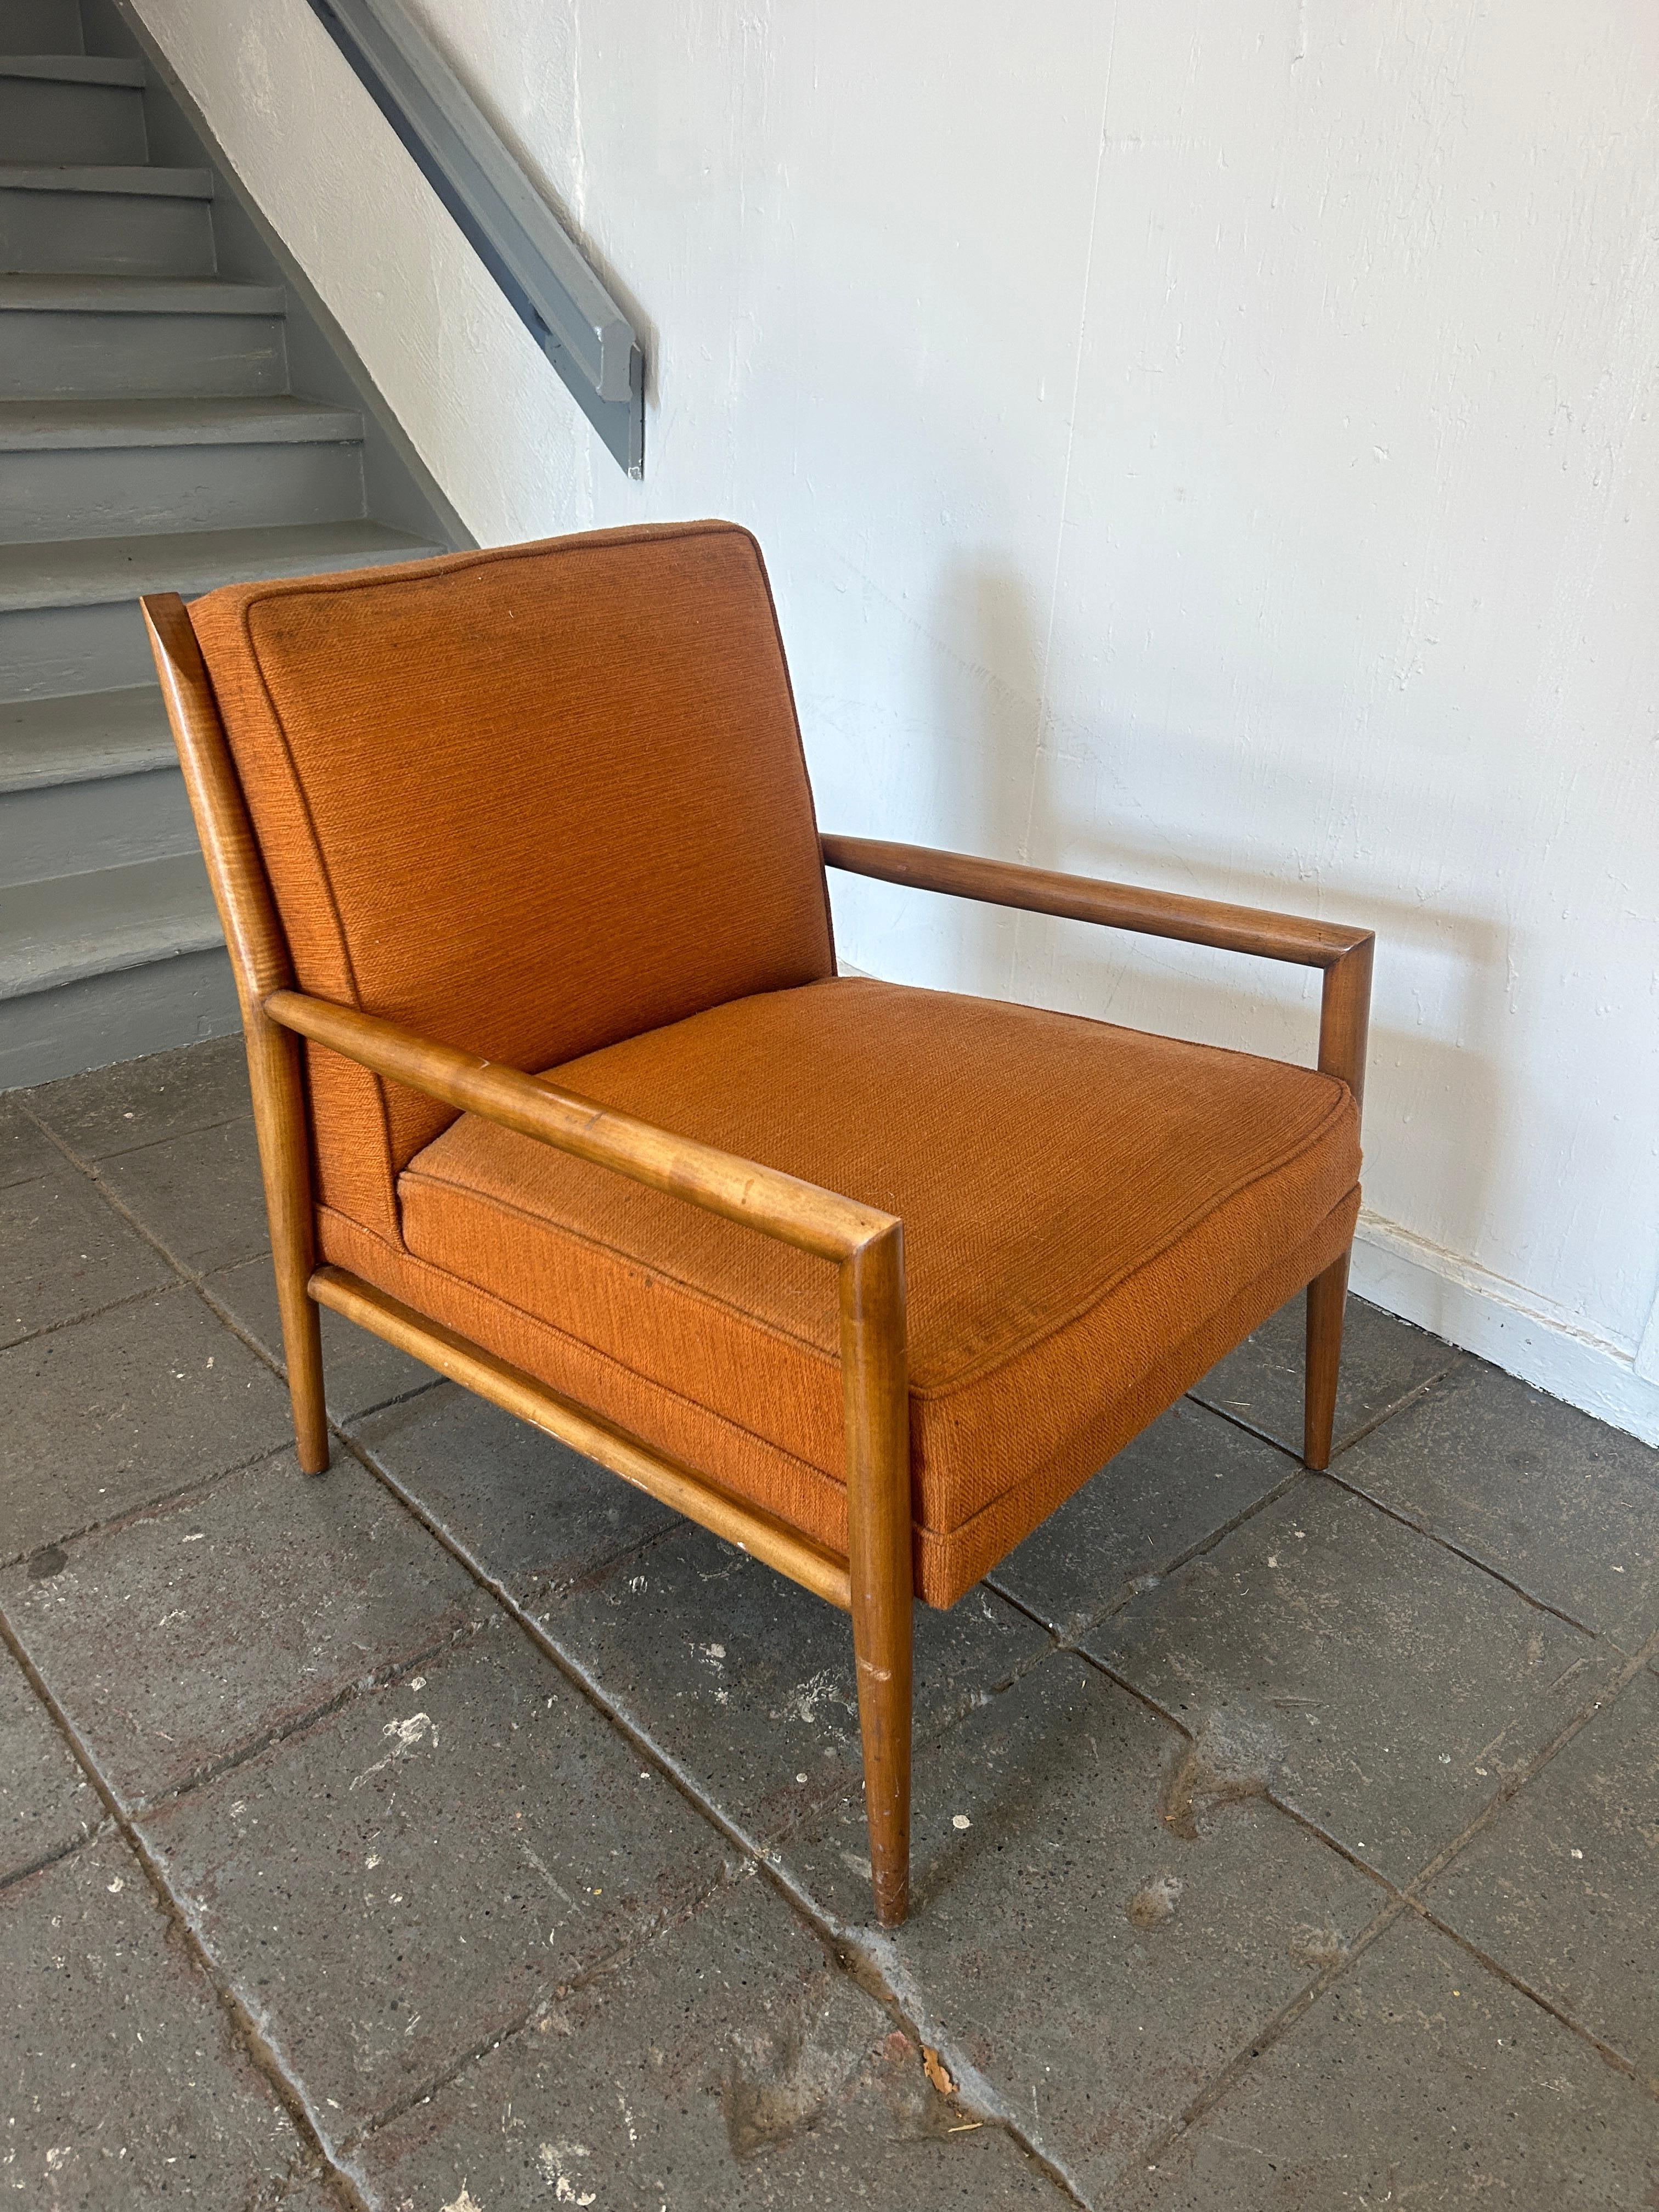 Original midcentury rare Paul McCobb low lounge chair . Solid maple wood construction with a walnut finish. Original Orange worn upholstery - Would require new Upholstery. Beautiful low design. Designed by Paul McCobb. Very rare chair. Original